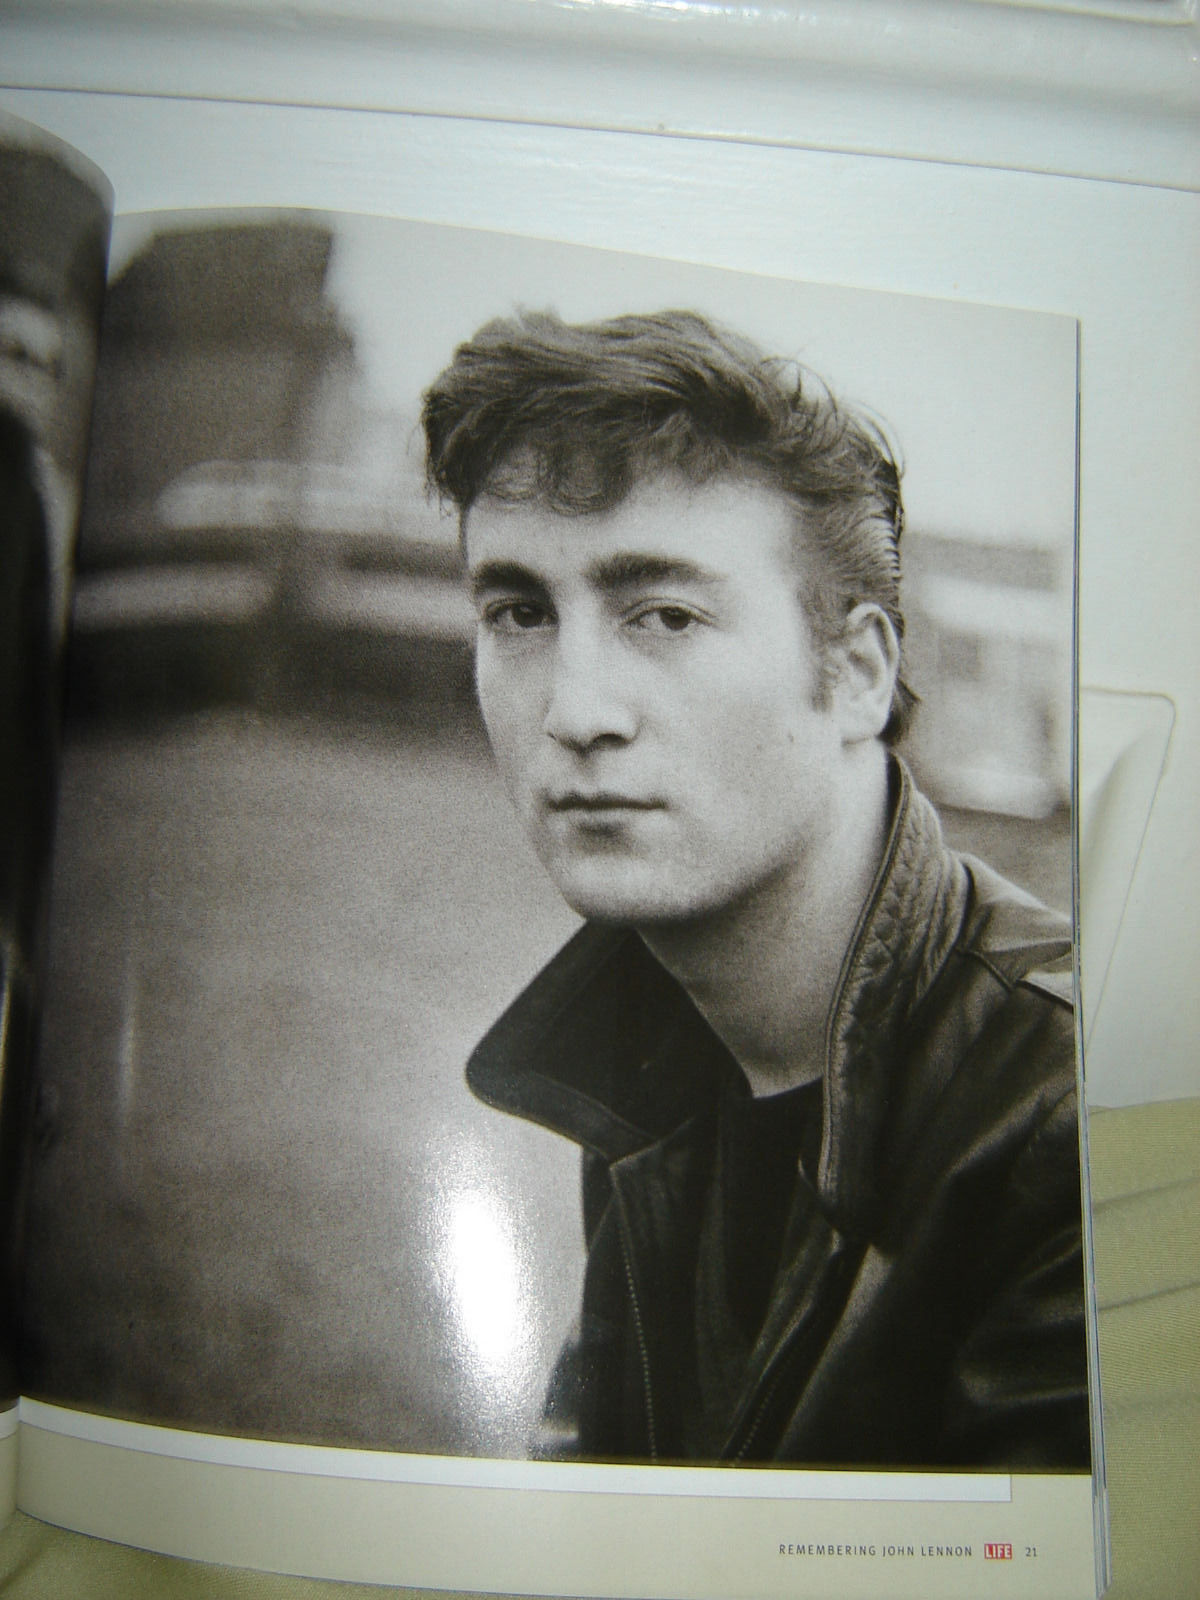 Original A Time Life Book Special Remembering John Lennon 25 Years